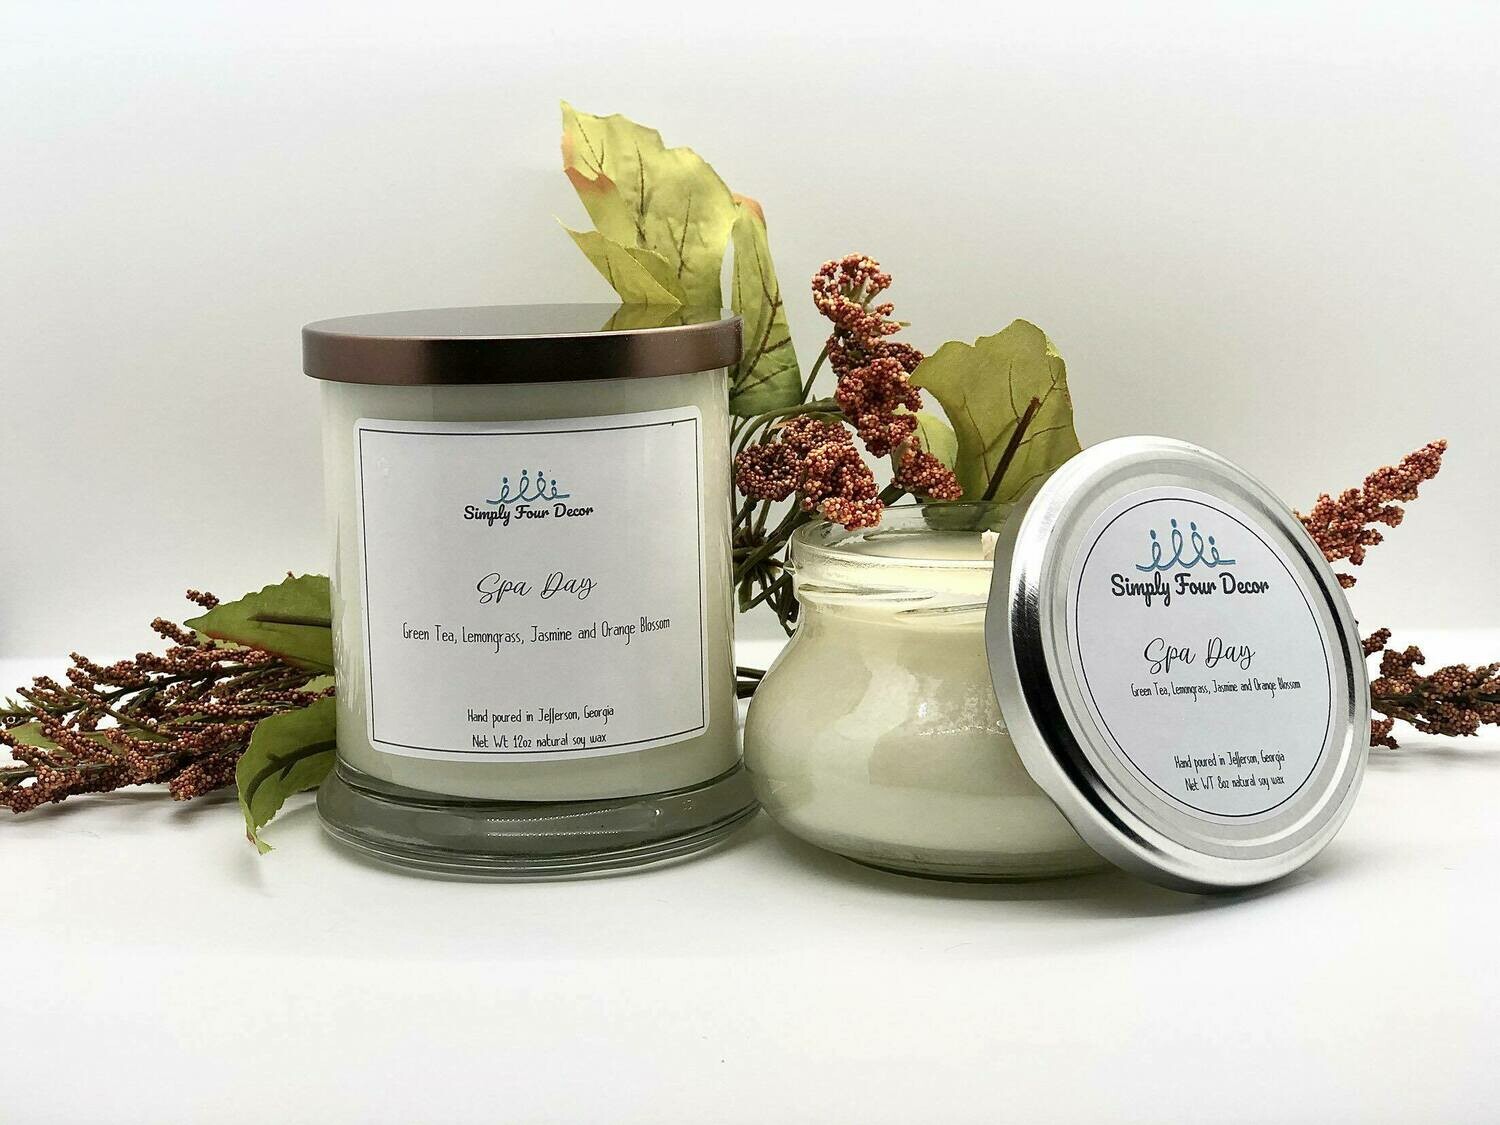 8oz Spa Day Candle